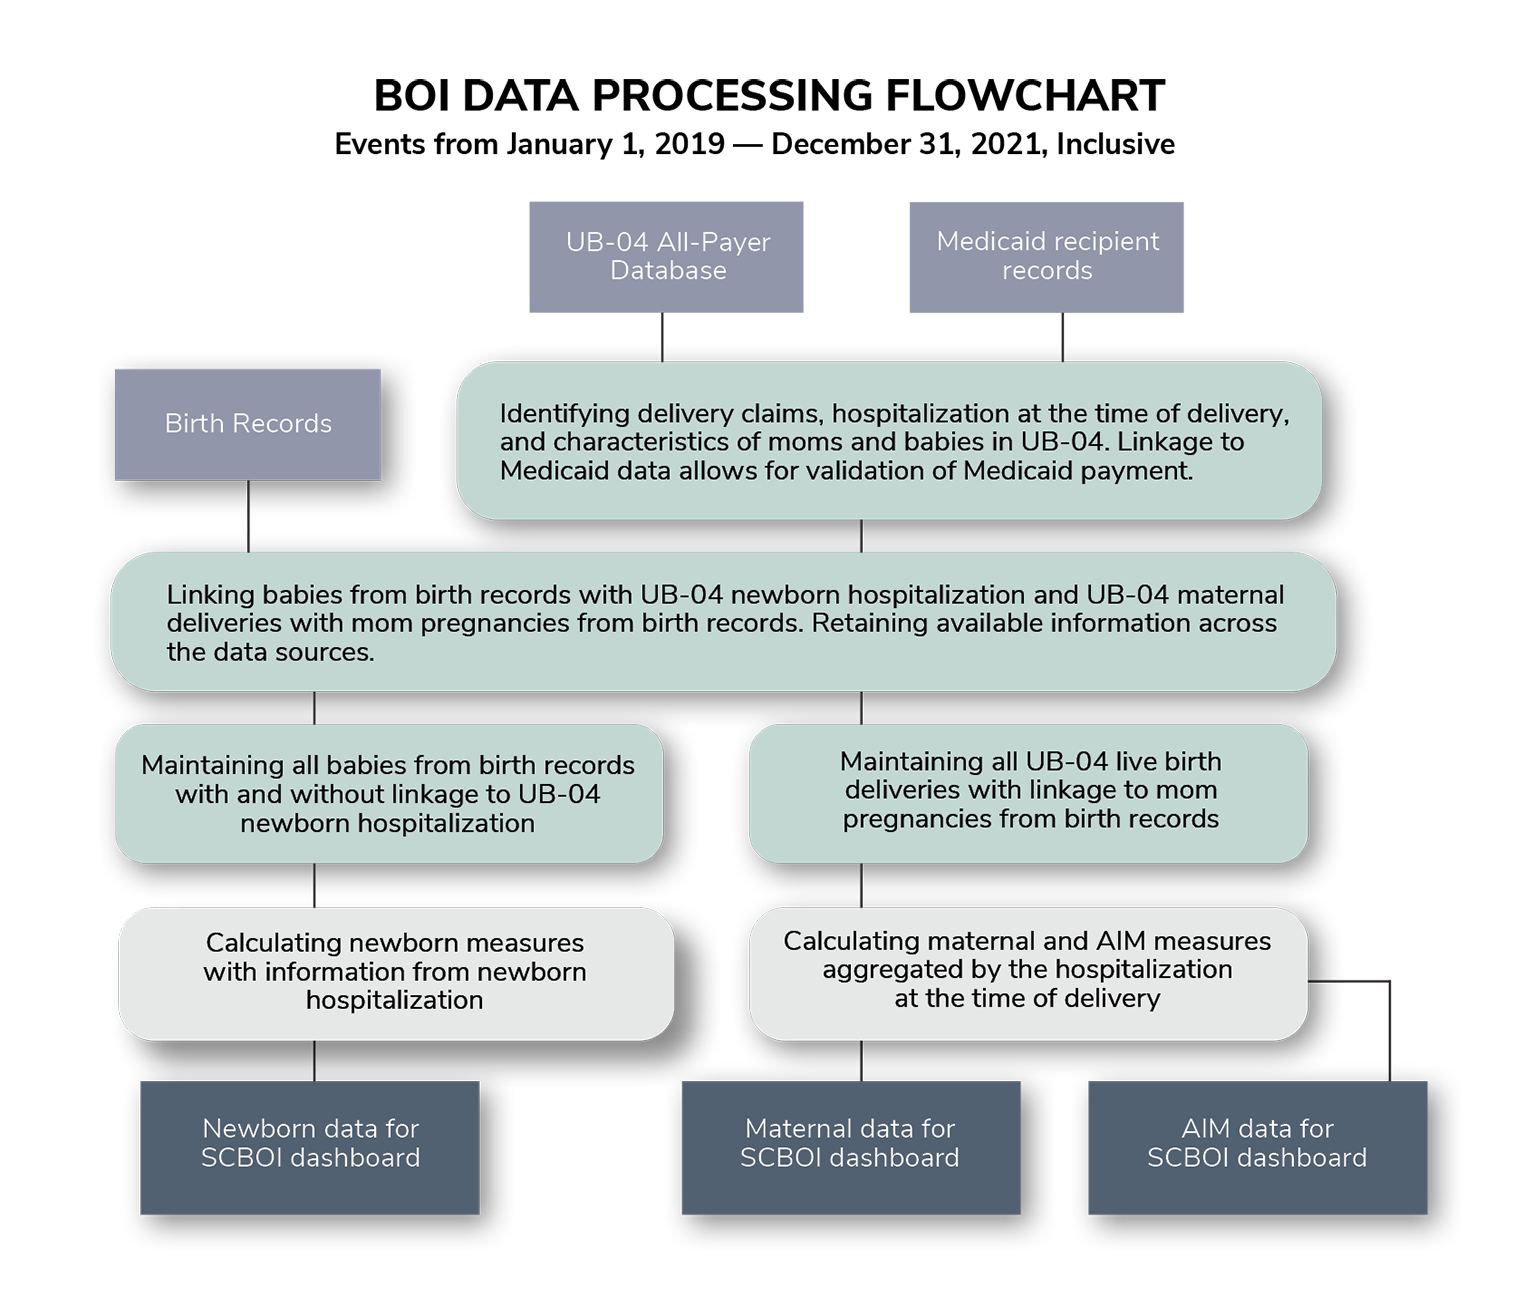 BOI Data Processing Flowchart, Events from January 1, 2019 — December 31, 2021, Inclusive and also available in About the Data PDF.